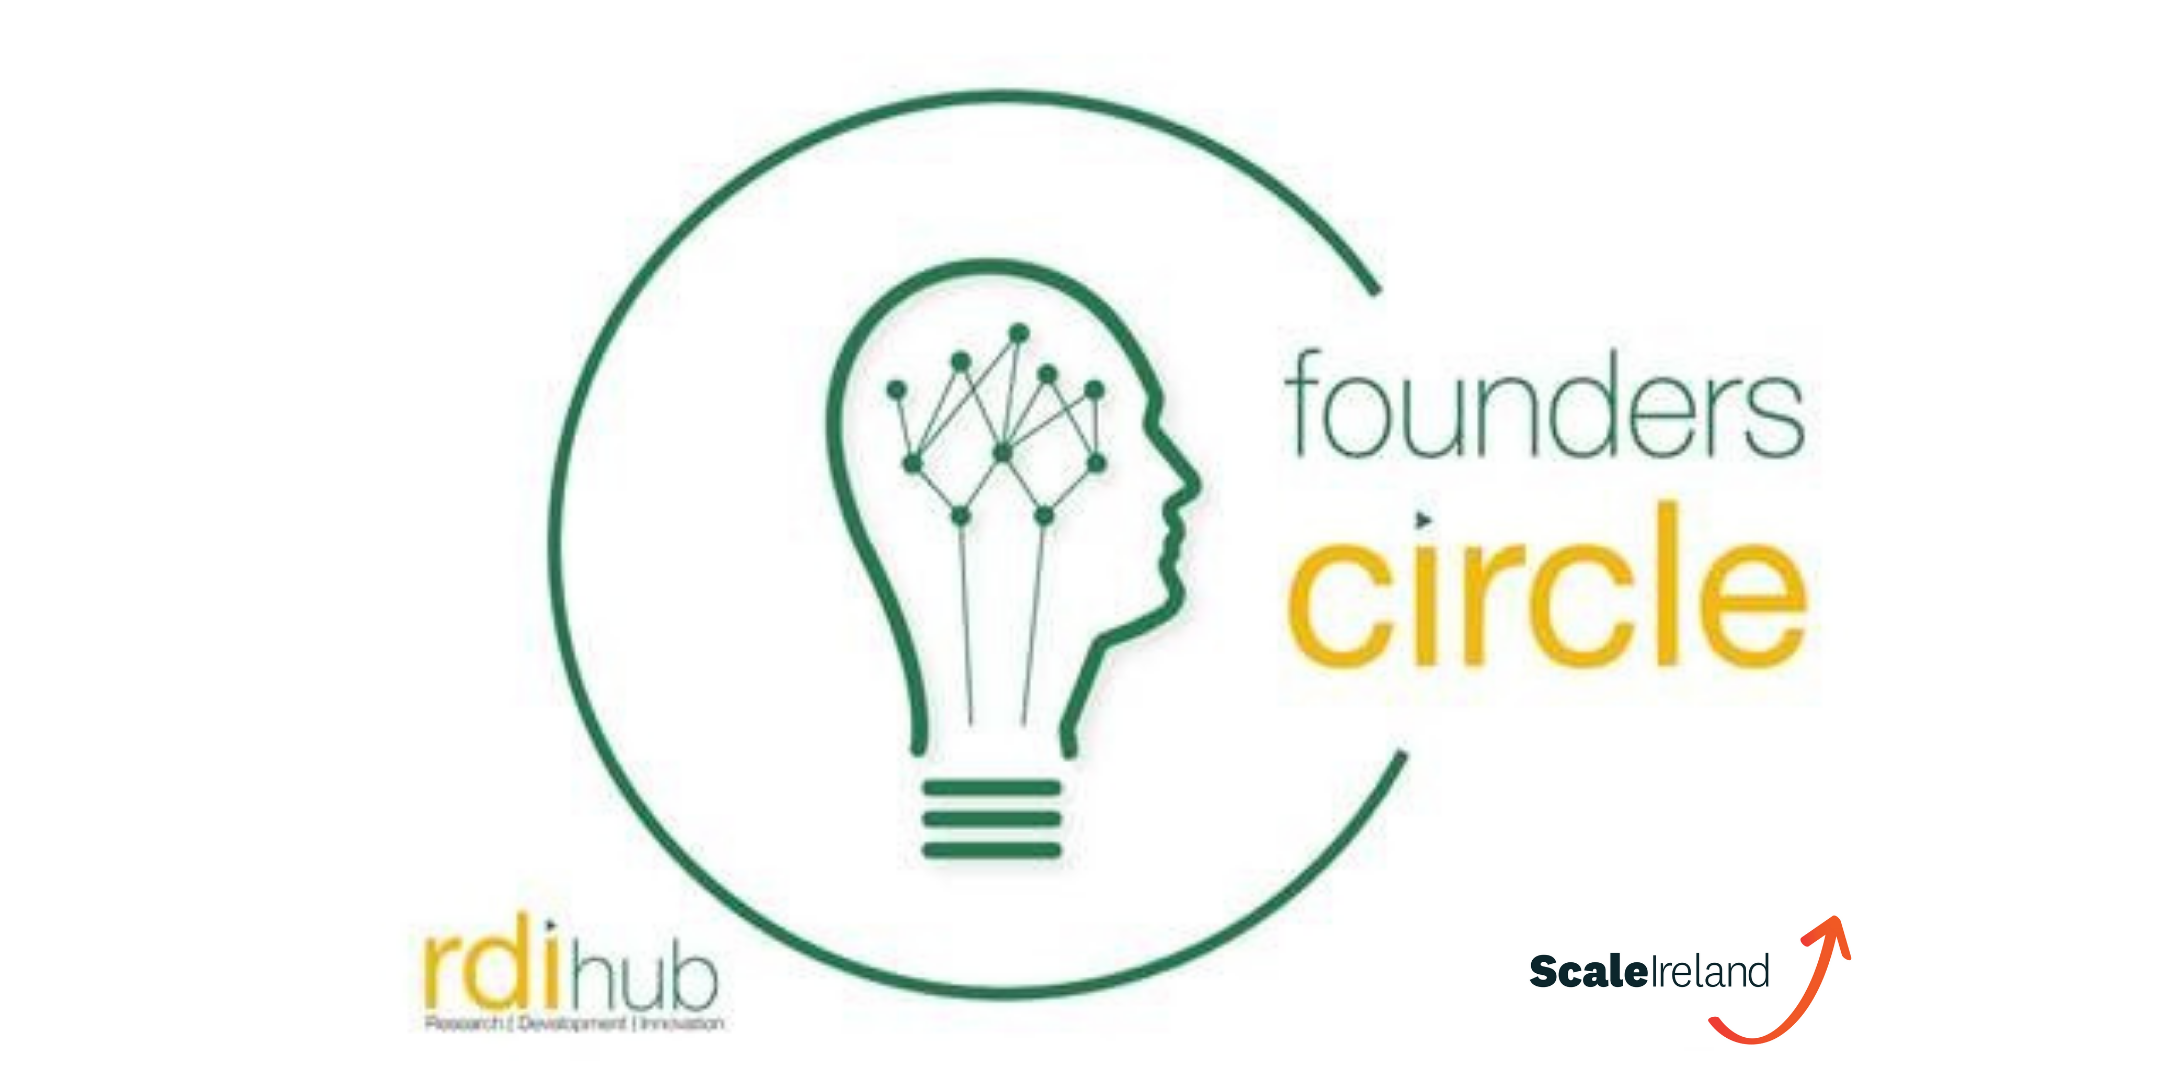 The Founders’ Circle powered by RDI Hub and Scale Ireland